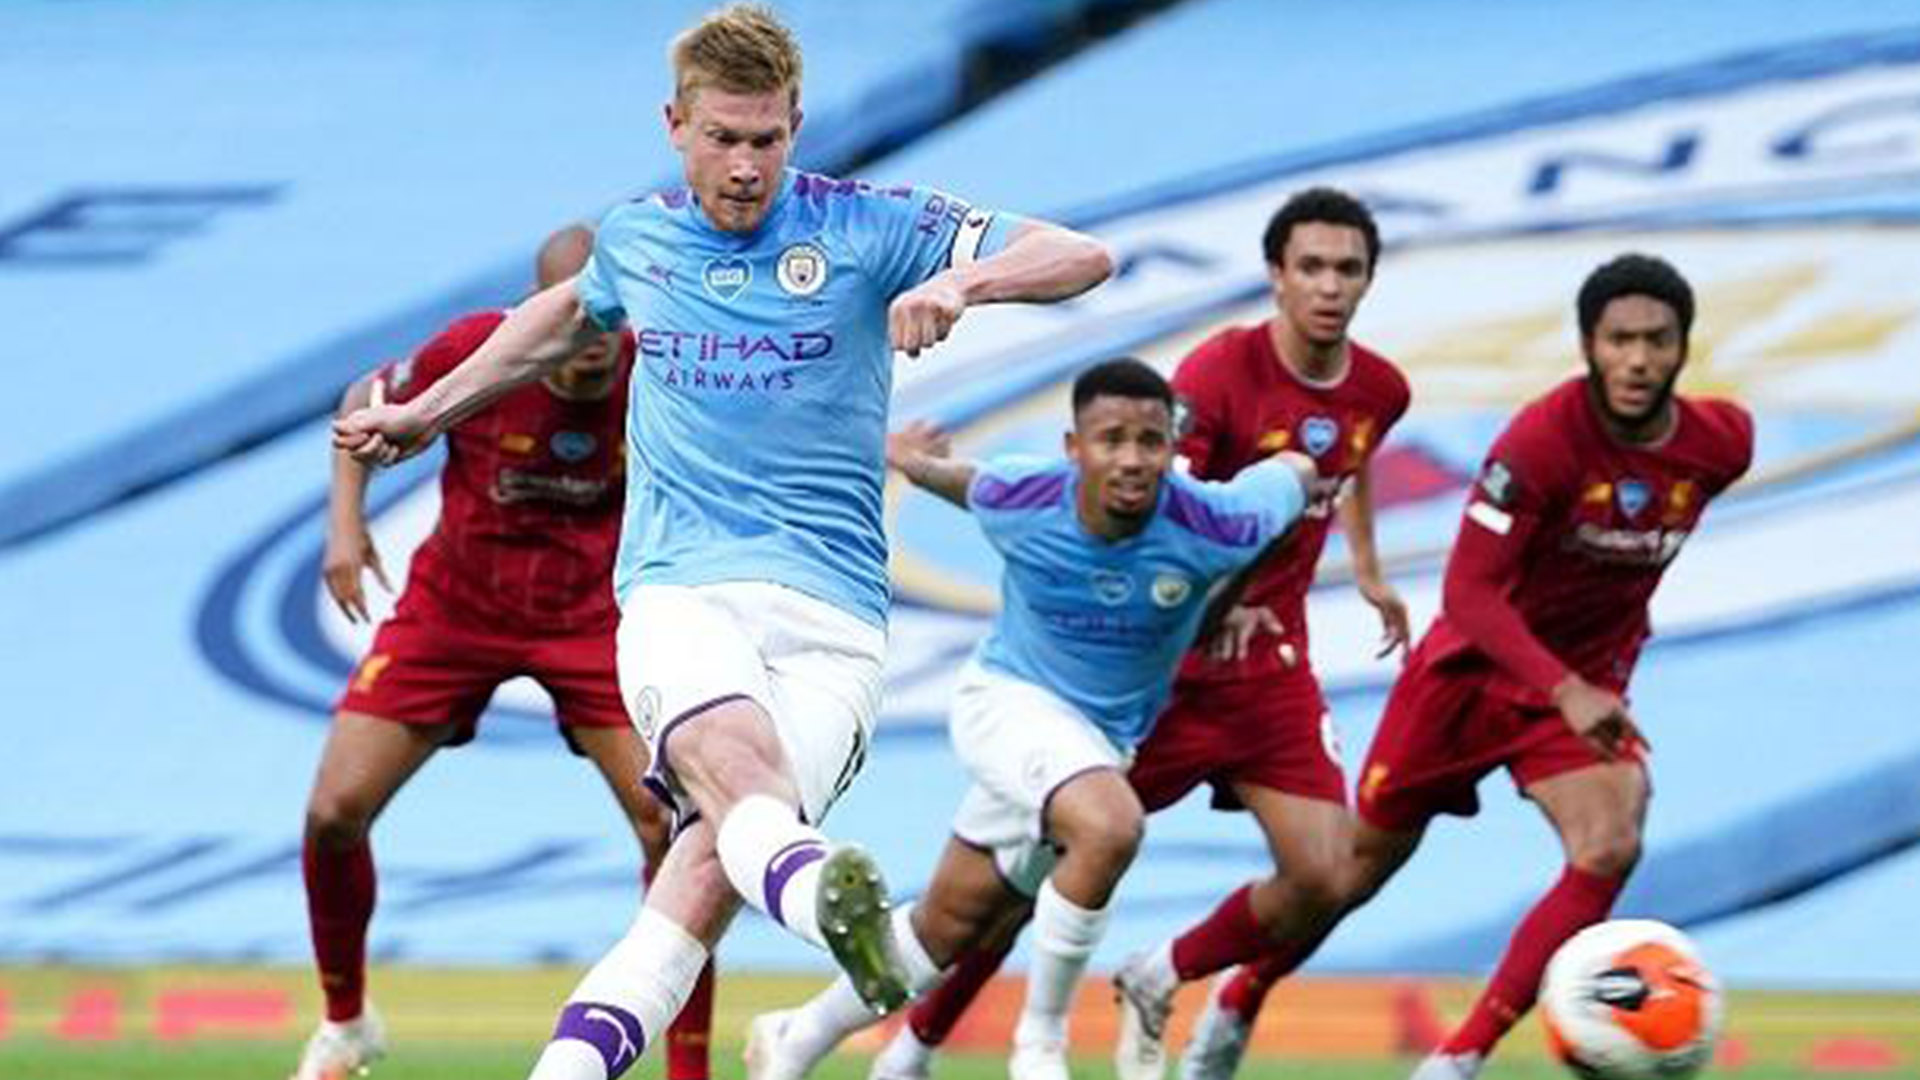 Liverpool Already EPL Champions Thrashed 4-0 by Man City